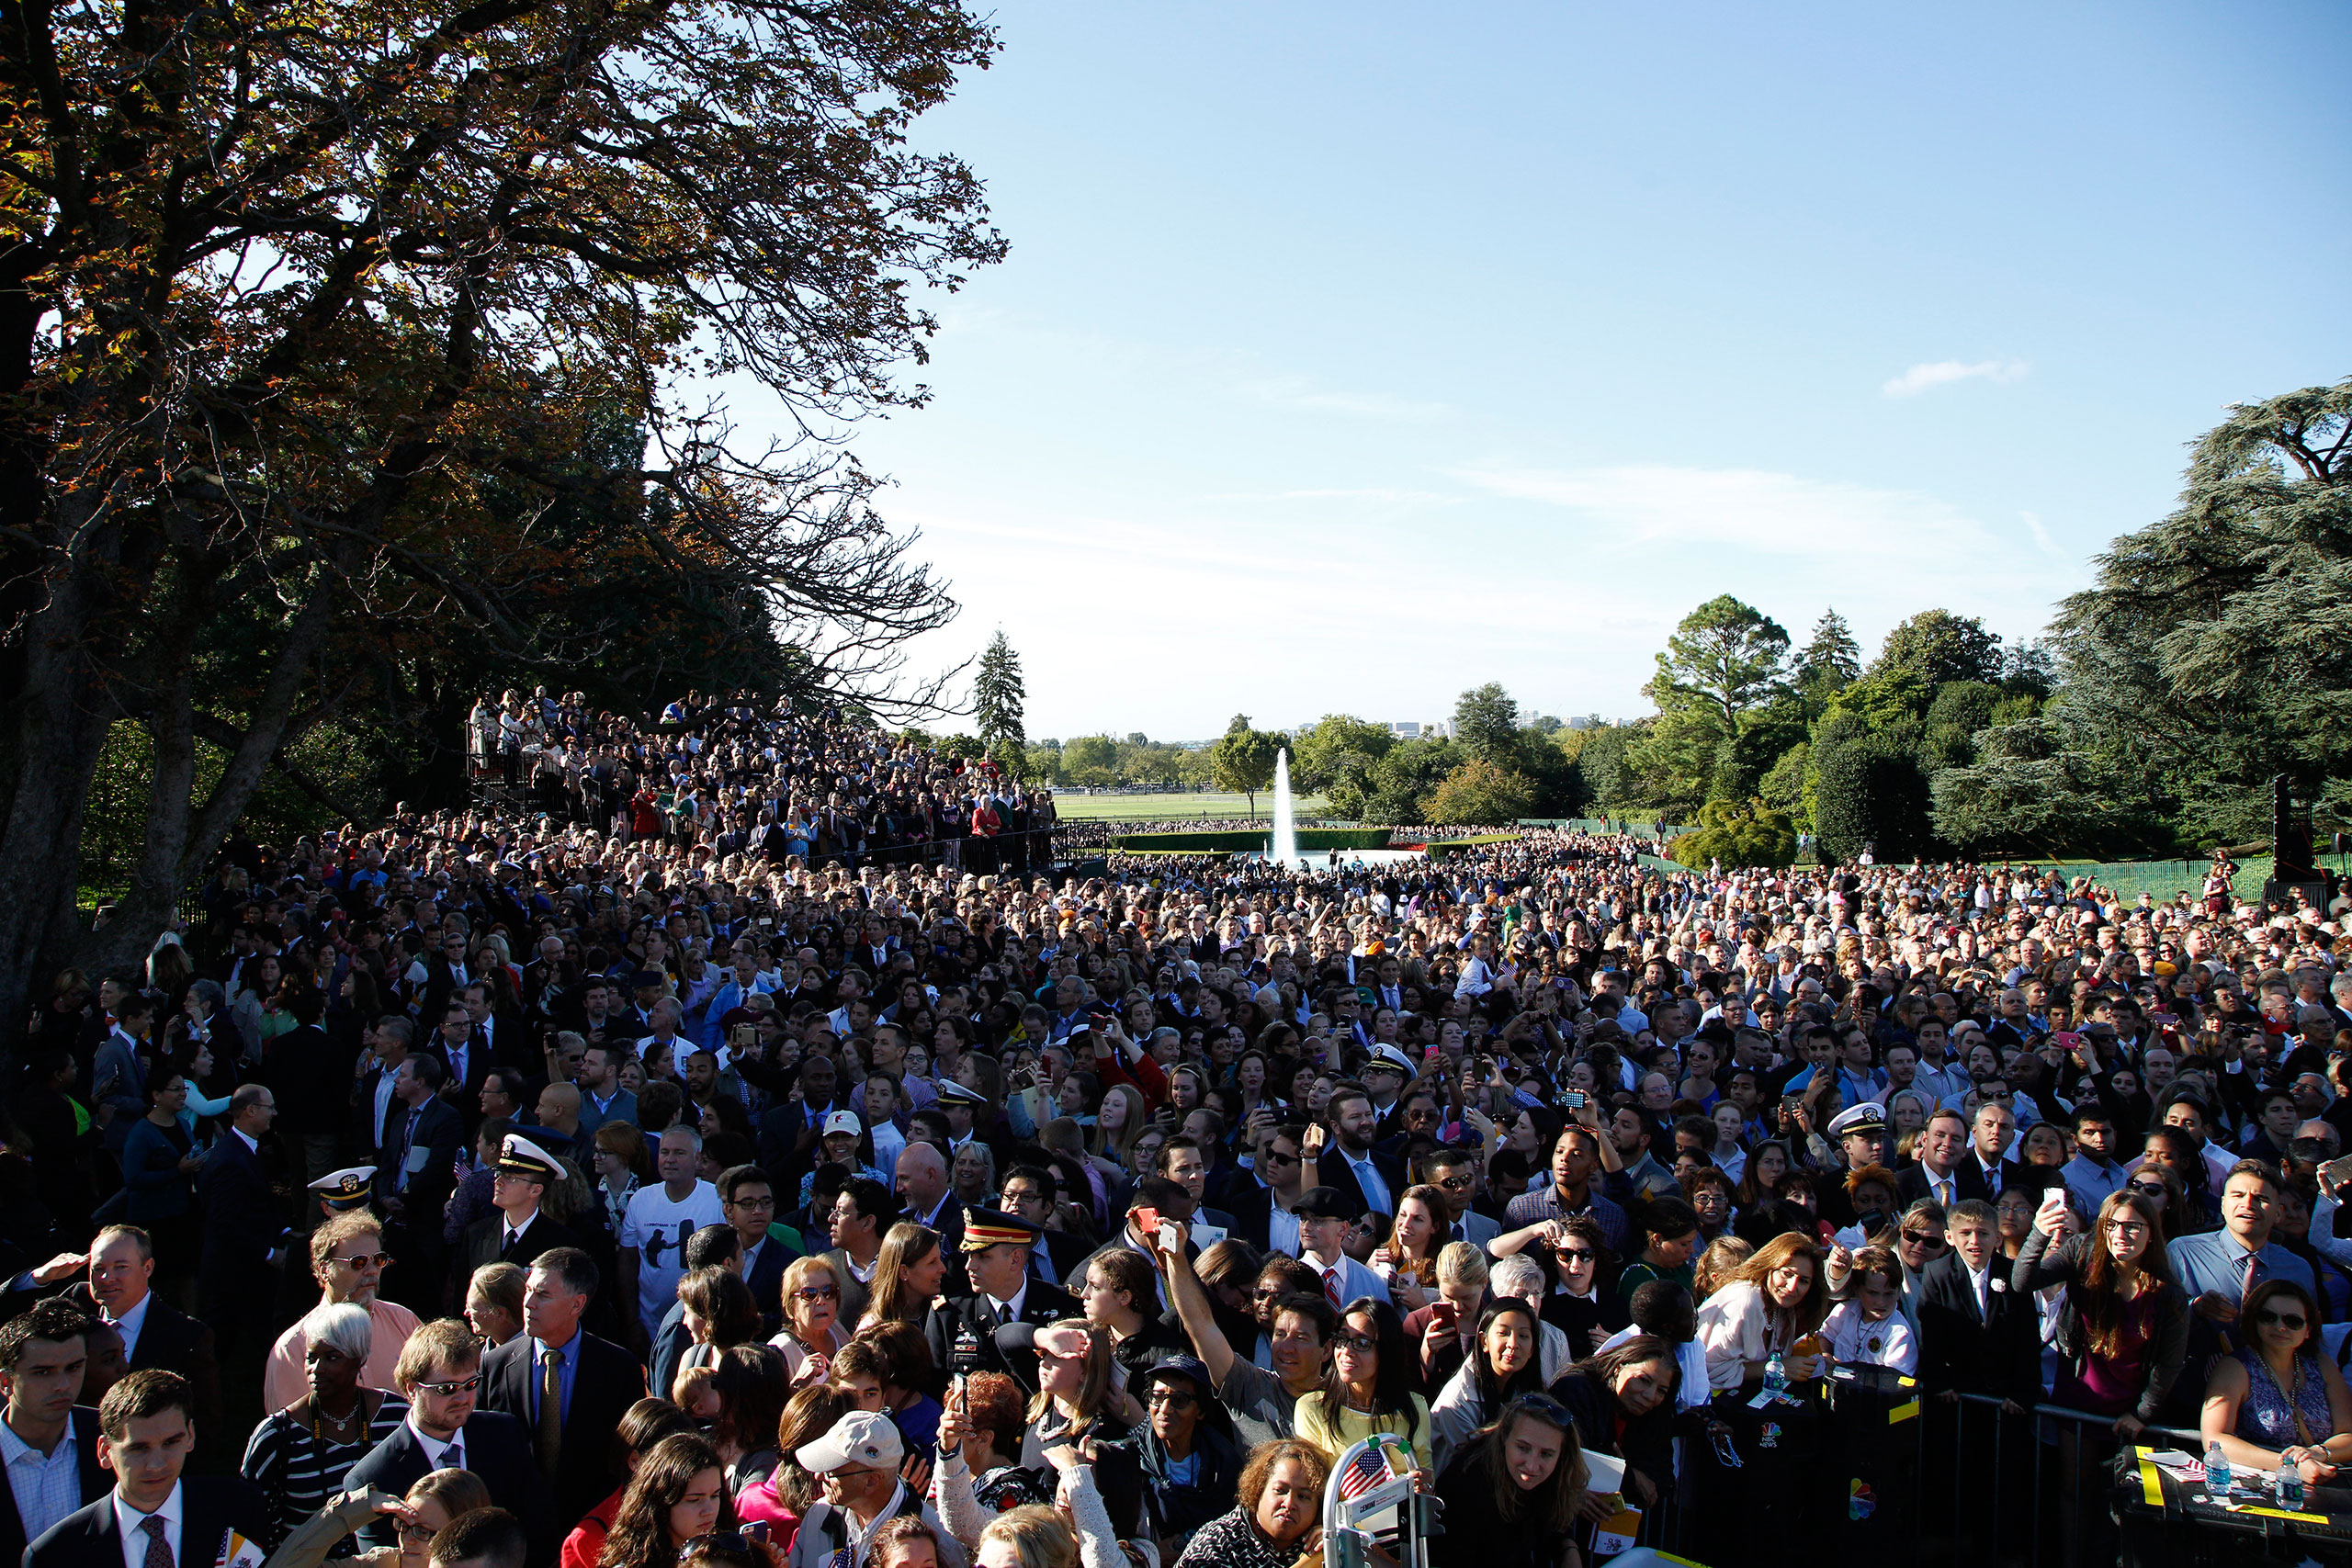 A crowd gathers on the the South Lawn of the White House during the arrival ceremony of Pope Francis. Washington, D.C., Sept. 23, 2015.From  Photographing the Pope From a Different Vantage Point